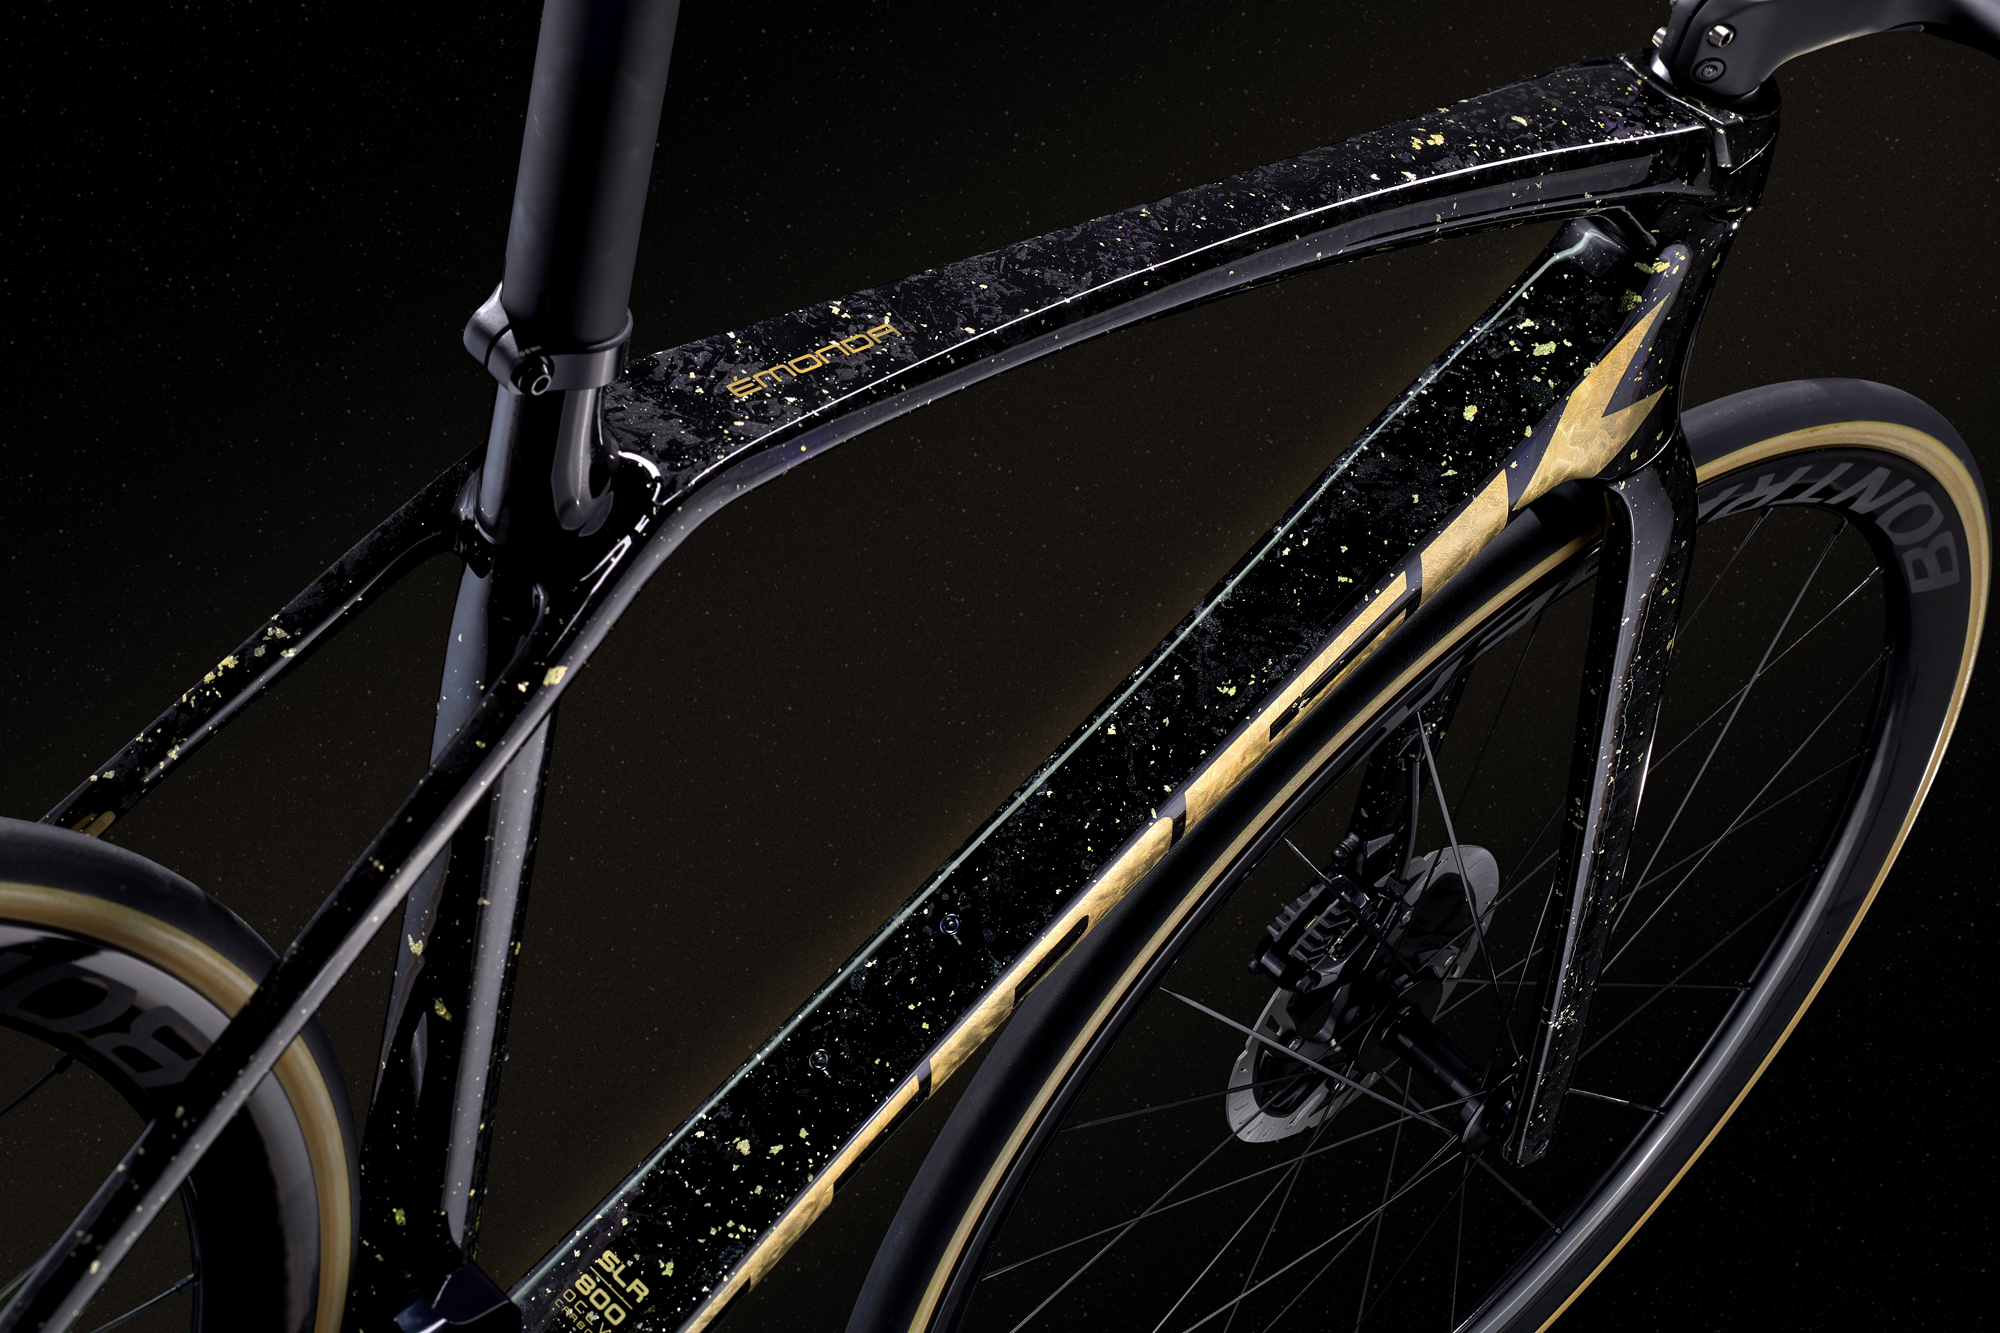 Trek Project One turns the bling up to 11 with gold flake and diamonds